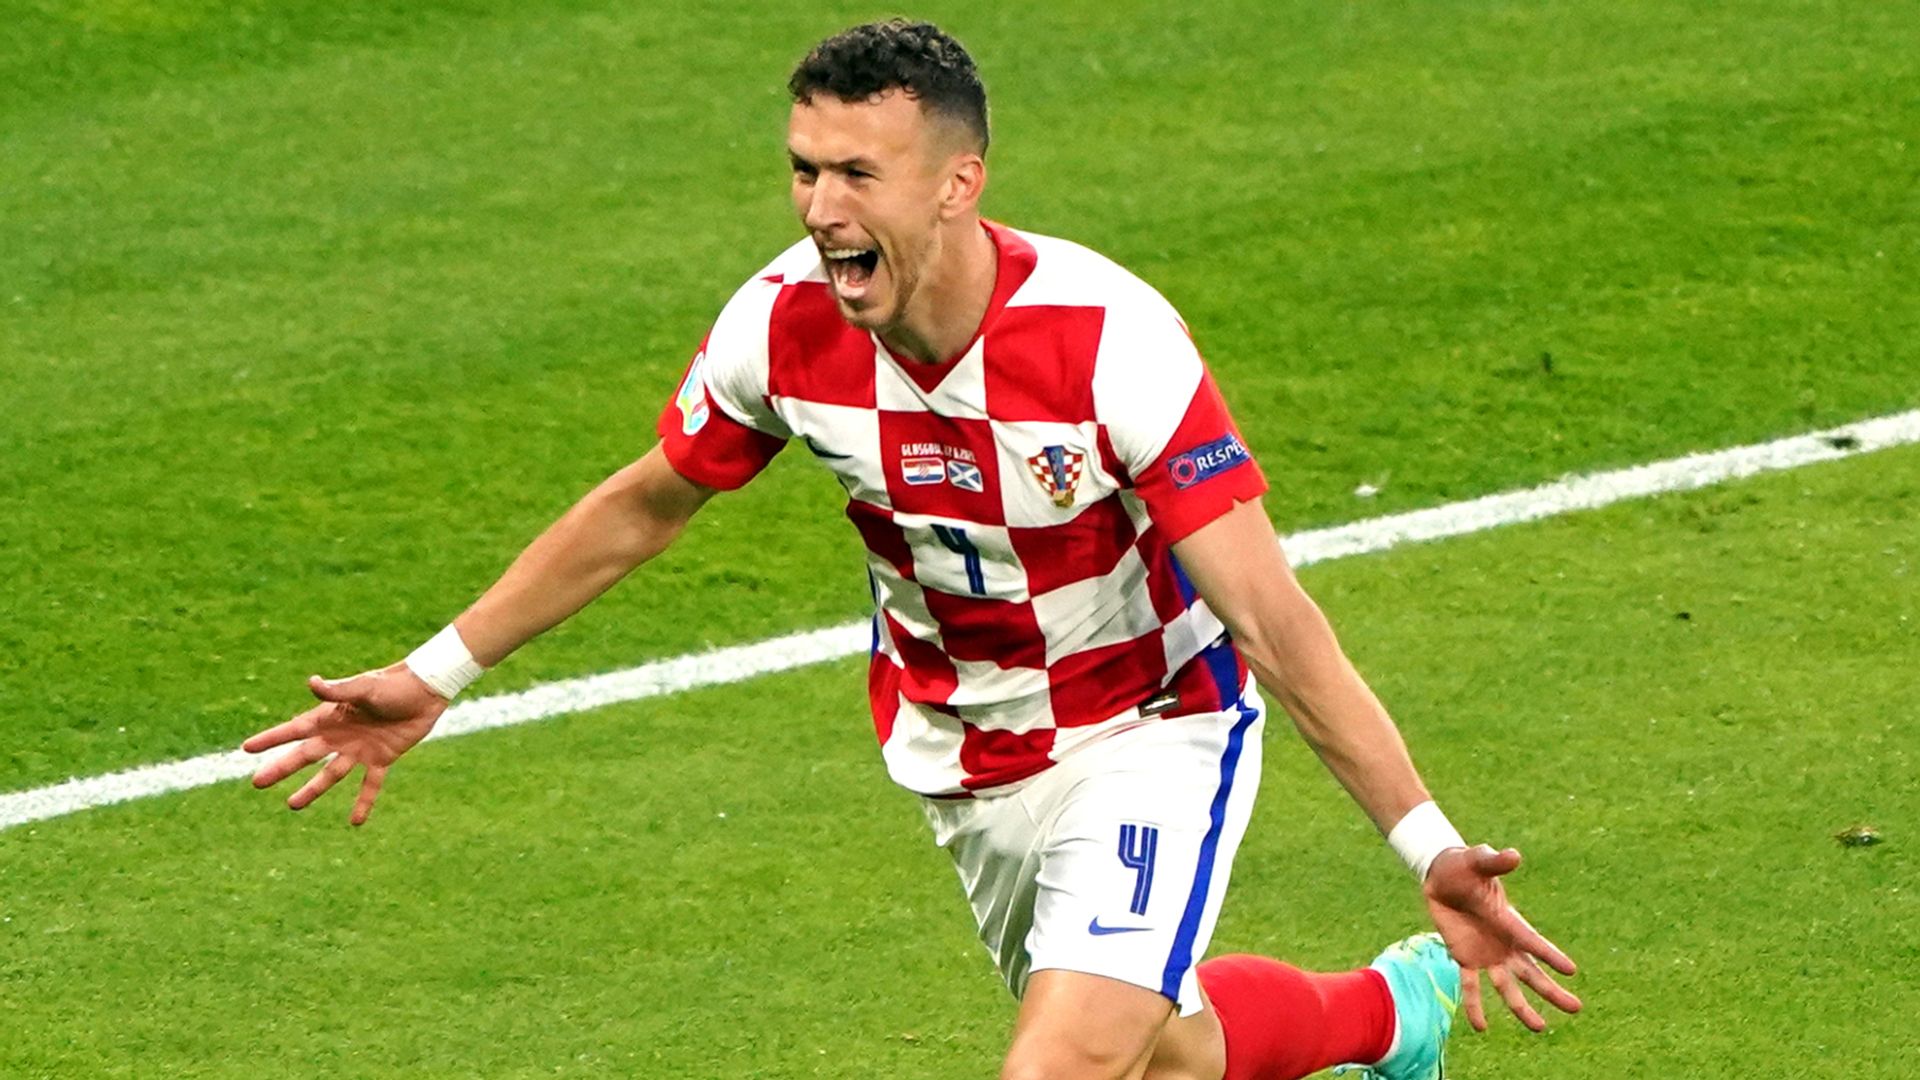 Croatia's Perisic tests positive for Covid ahead of Spain tie